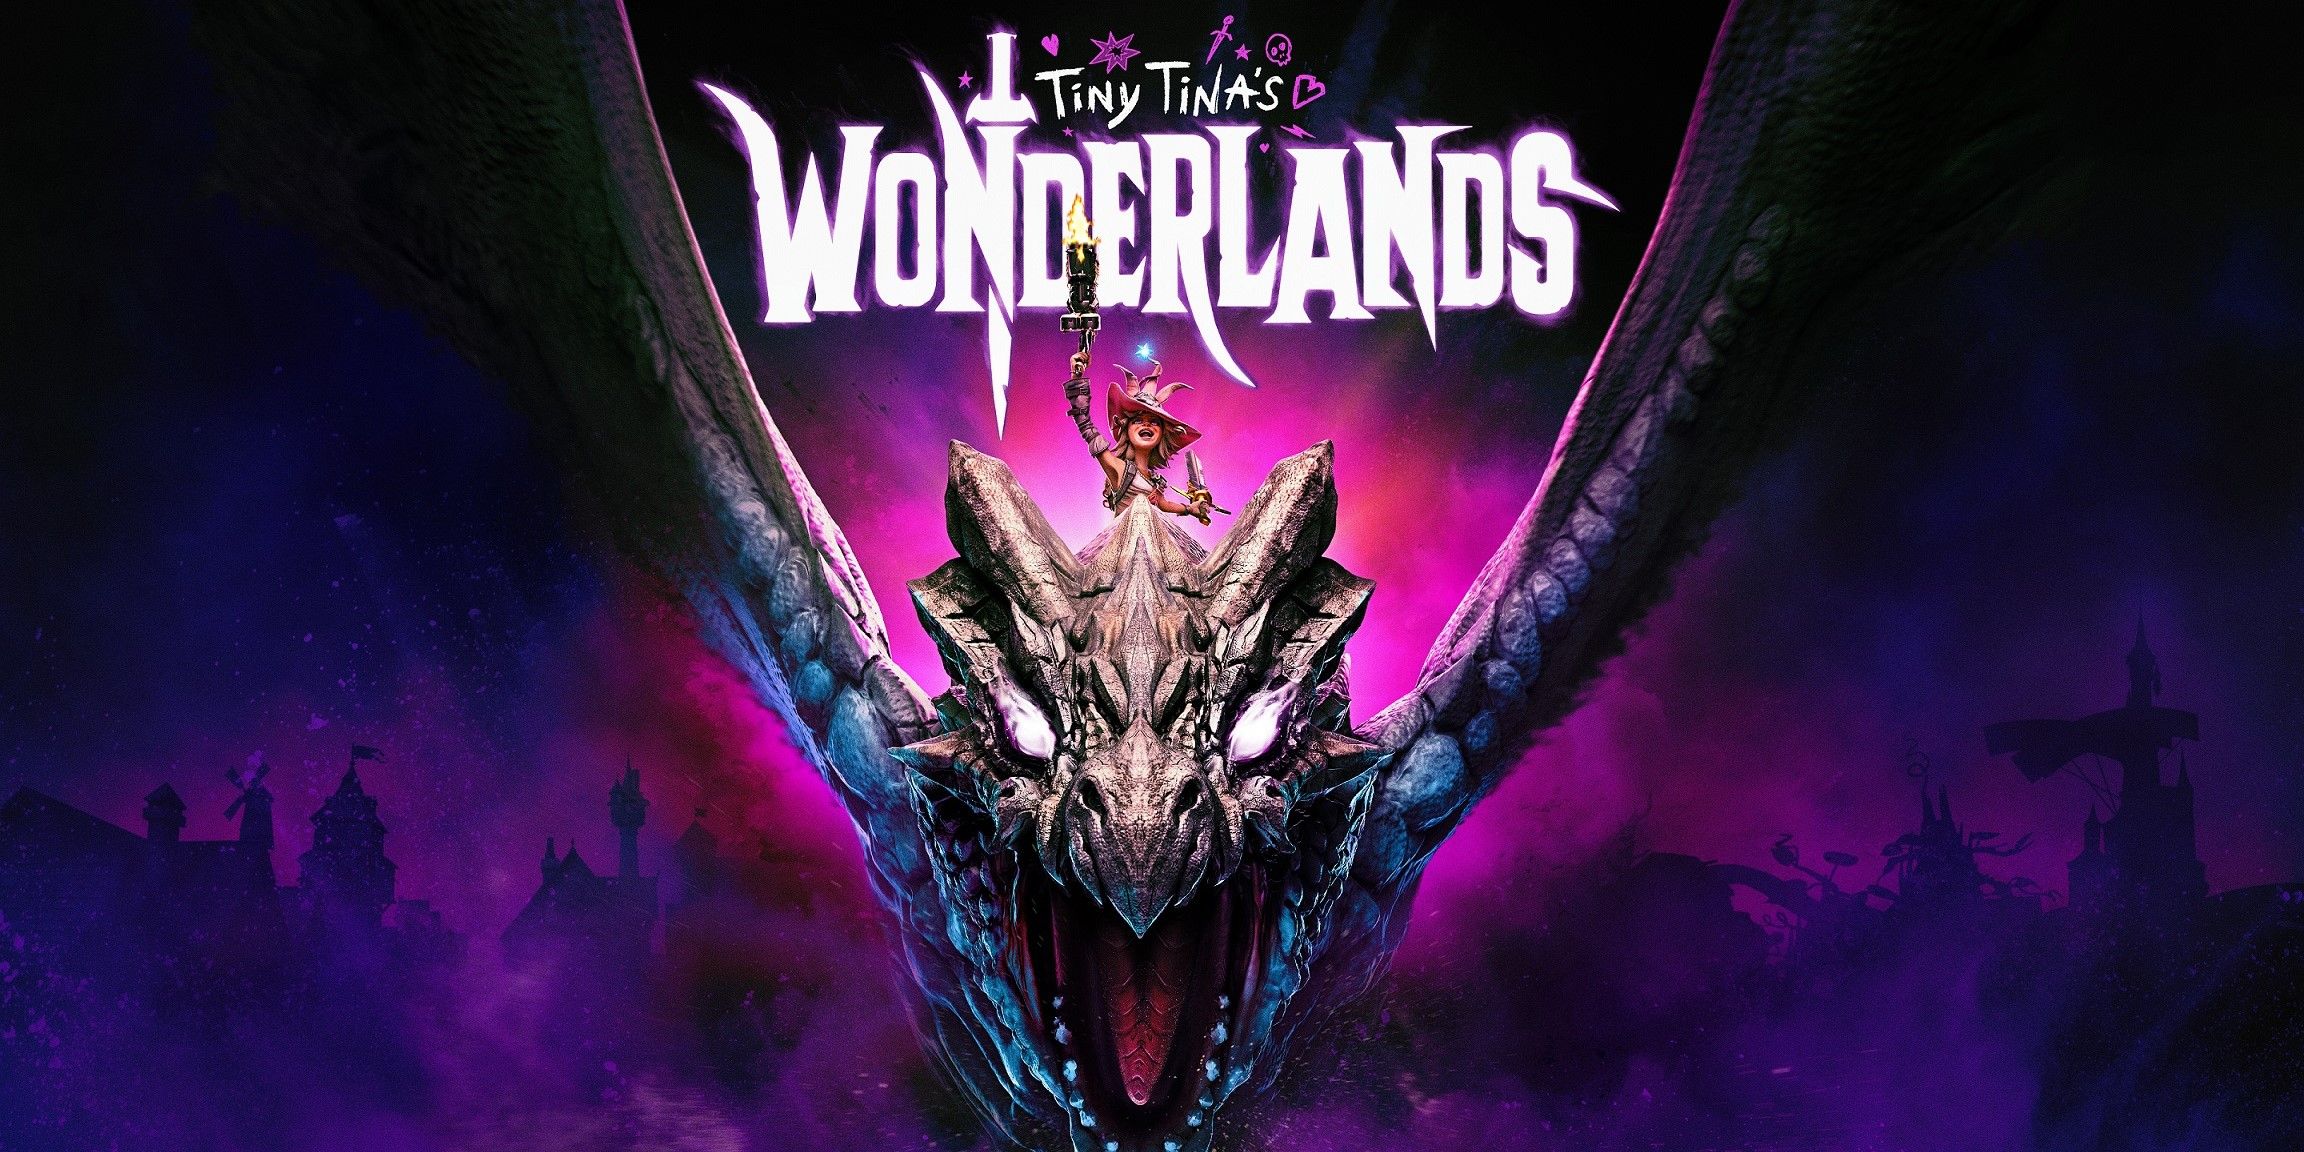 The title image for Tiny Tina's Wonderlands.